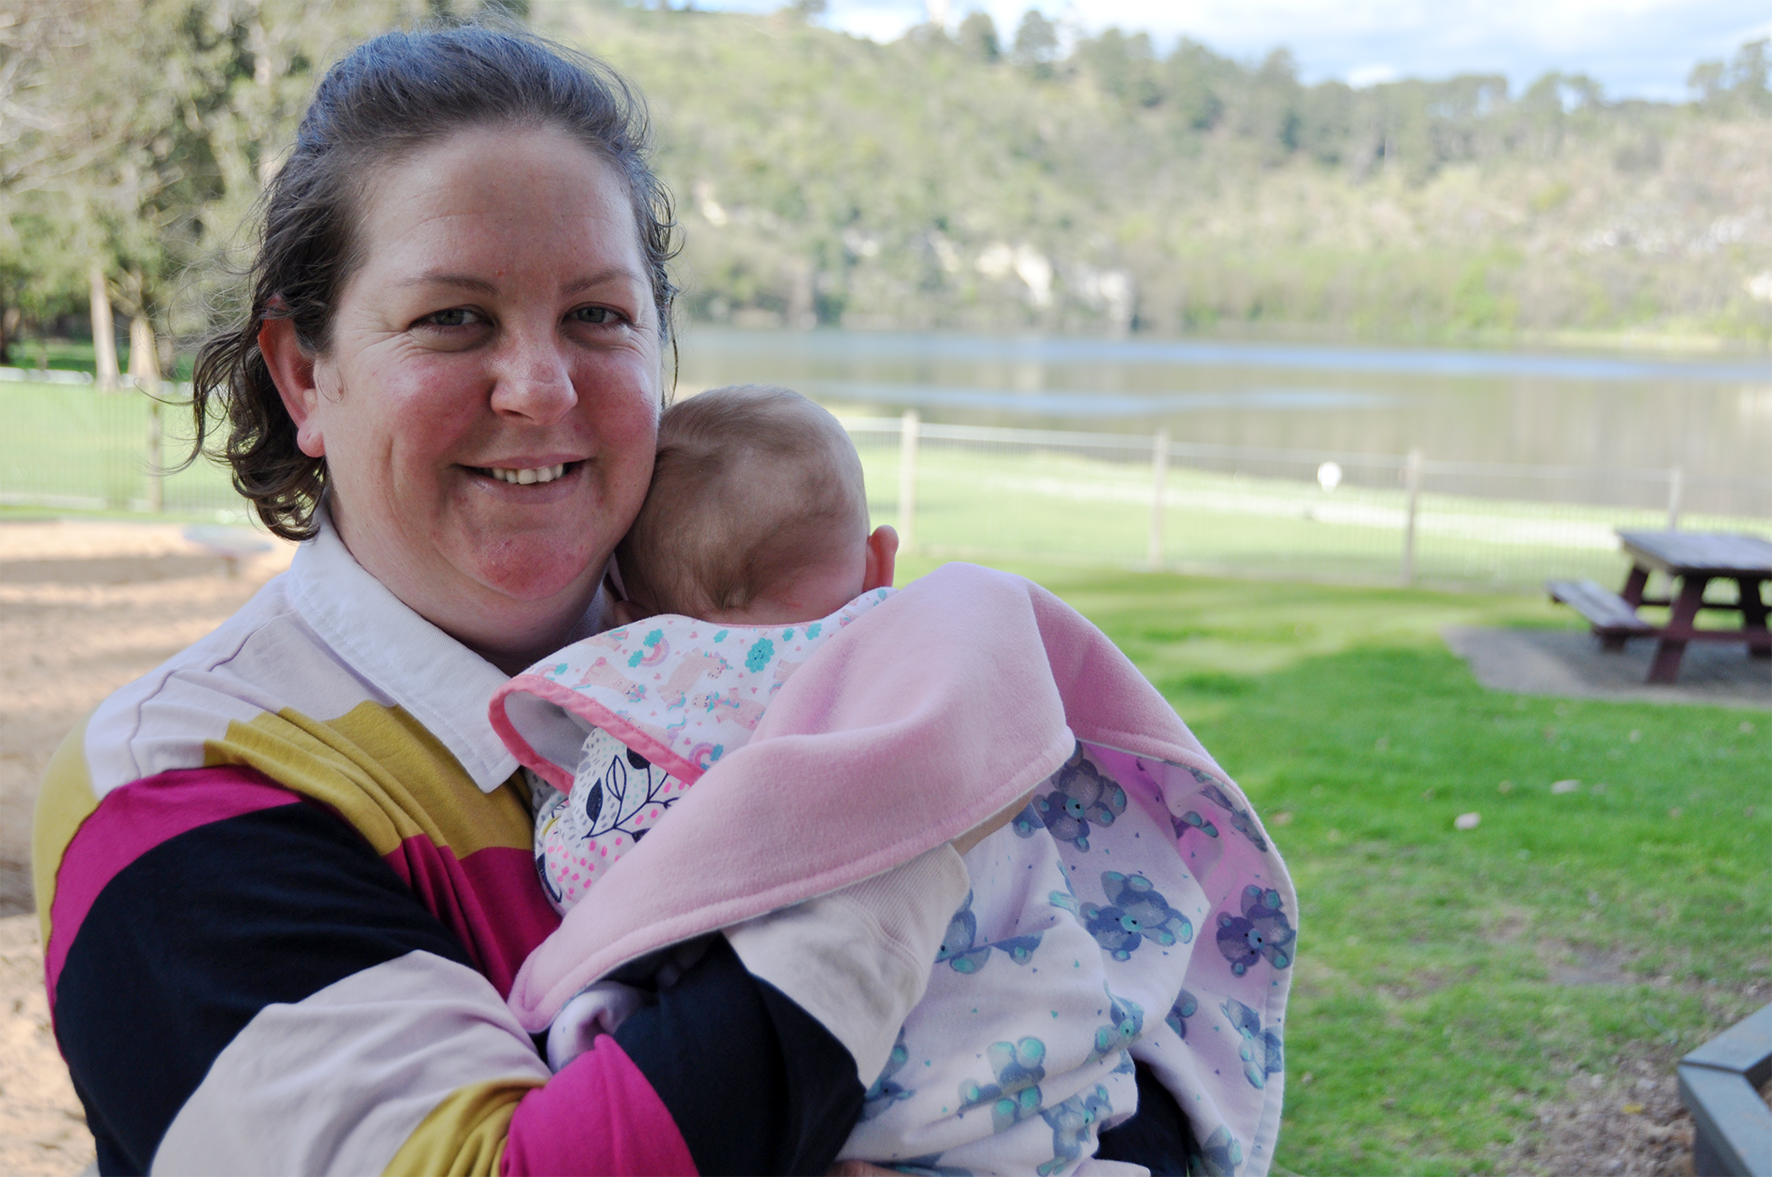 CARING: Mount Gambier mother Kate Thomas has helped care for more than 20 children, including infants, as a foster carer with ac.care.